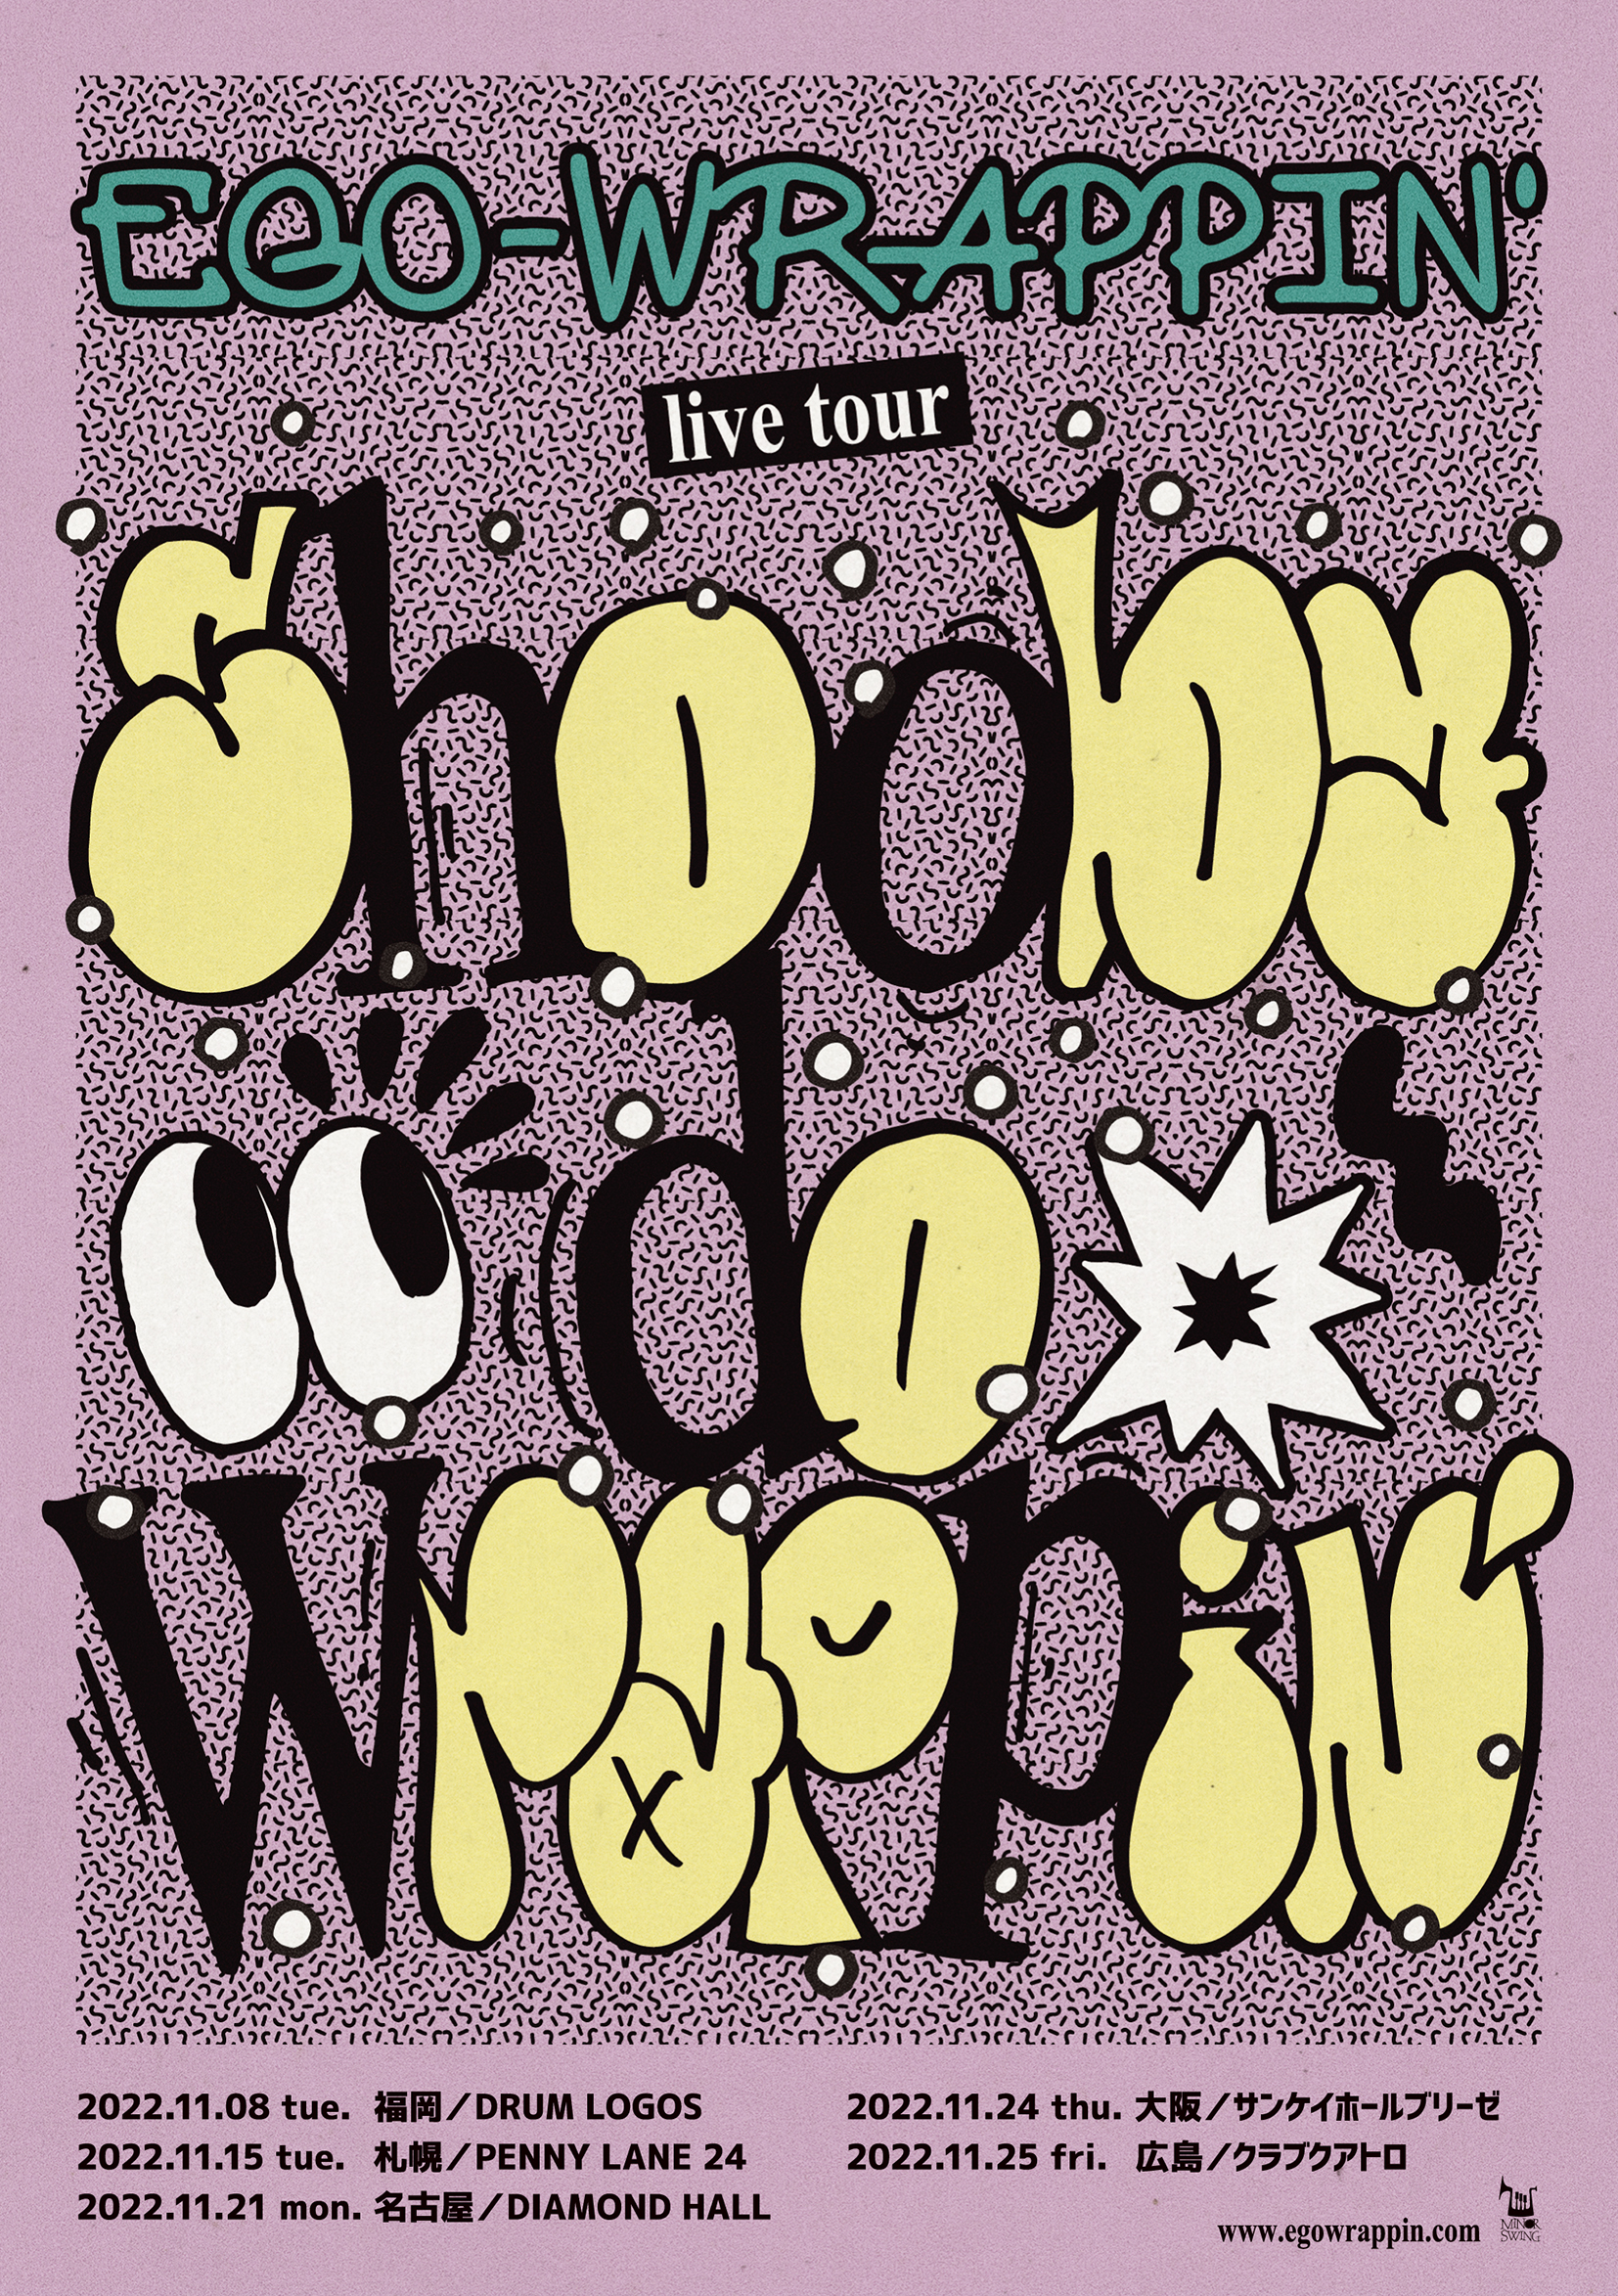 RGO-WRAPPIN' live tour 「shooby do wrappin'」FLYER